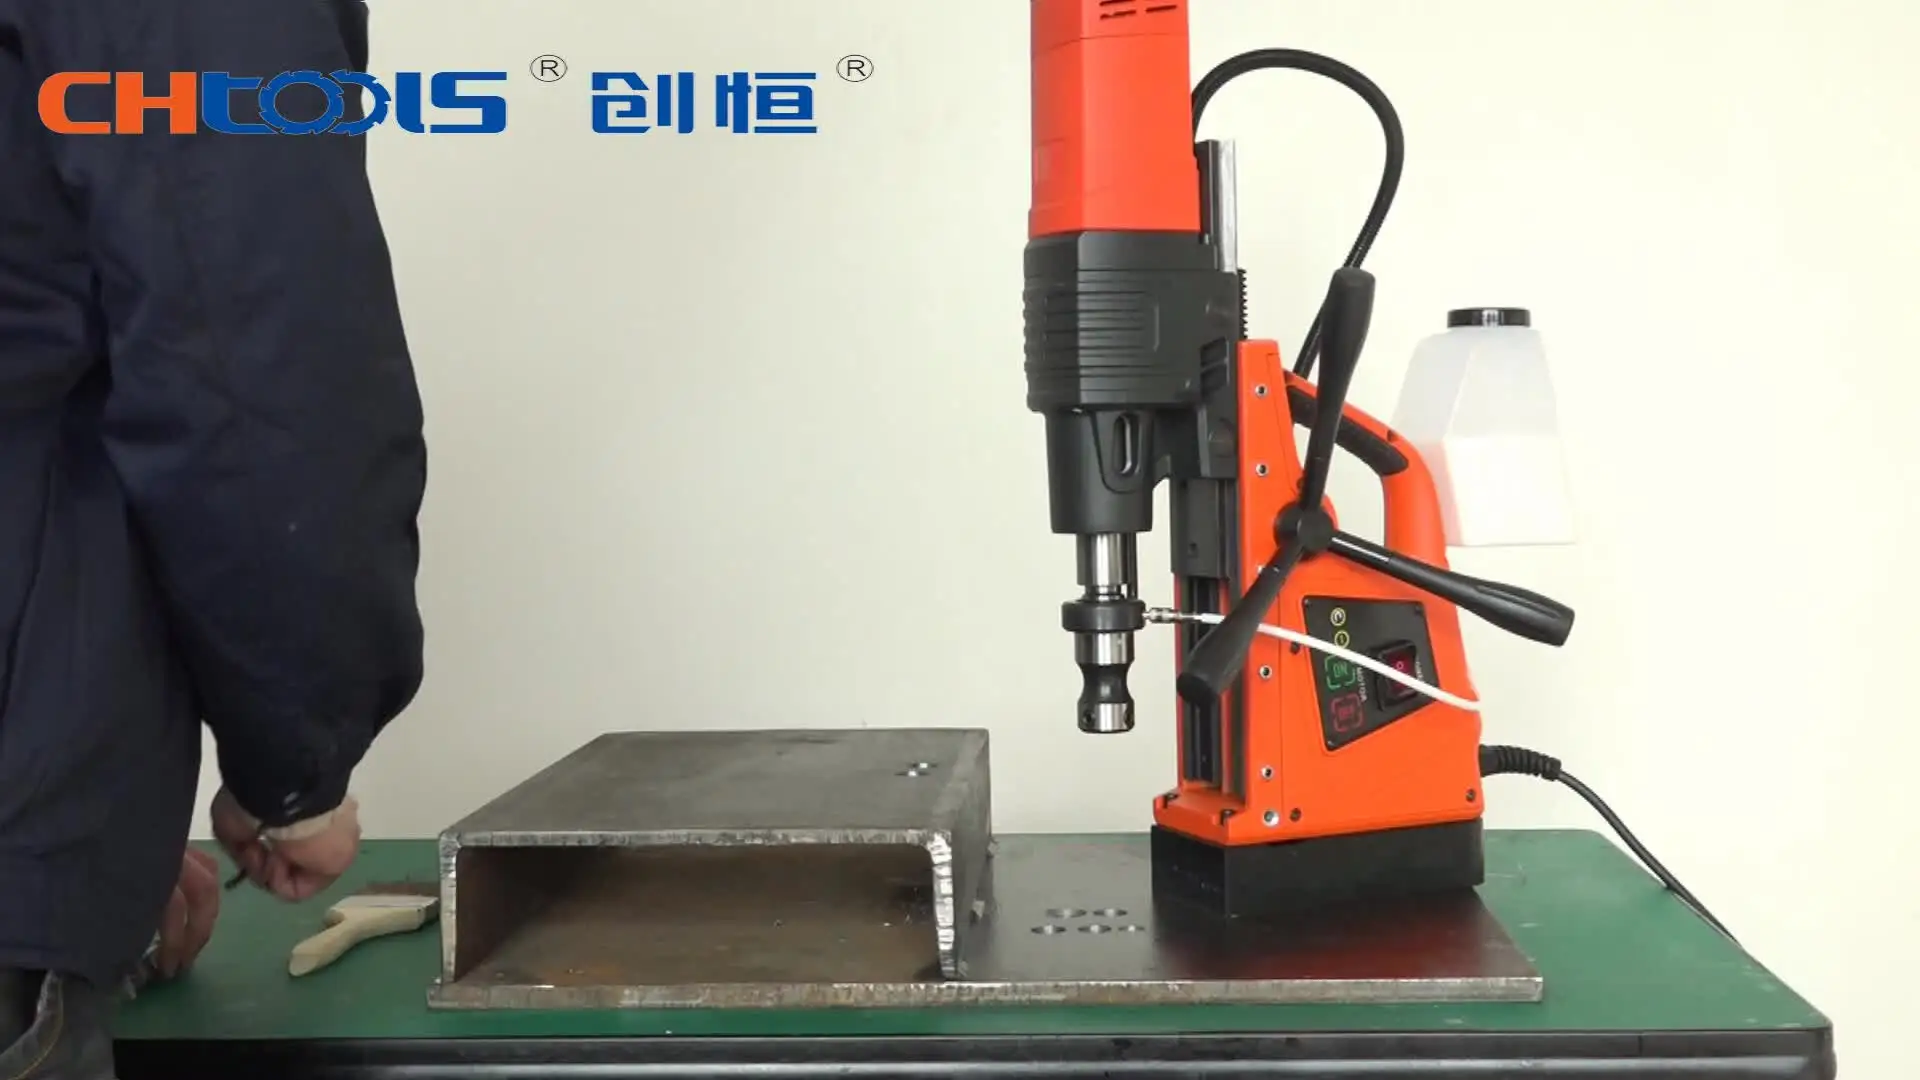 

Drilling machine CHTOOLS DX-60 broach cutter mag drill for drilling holes